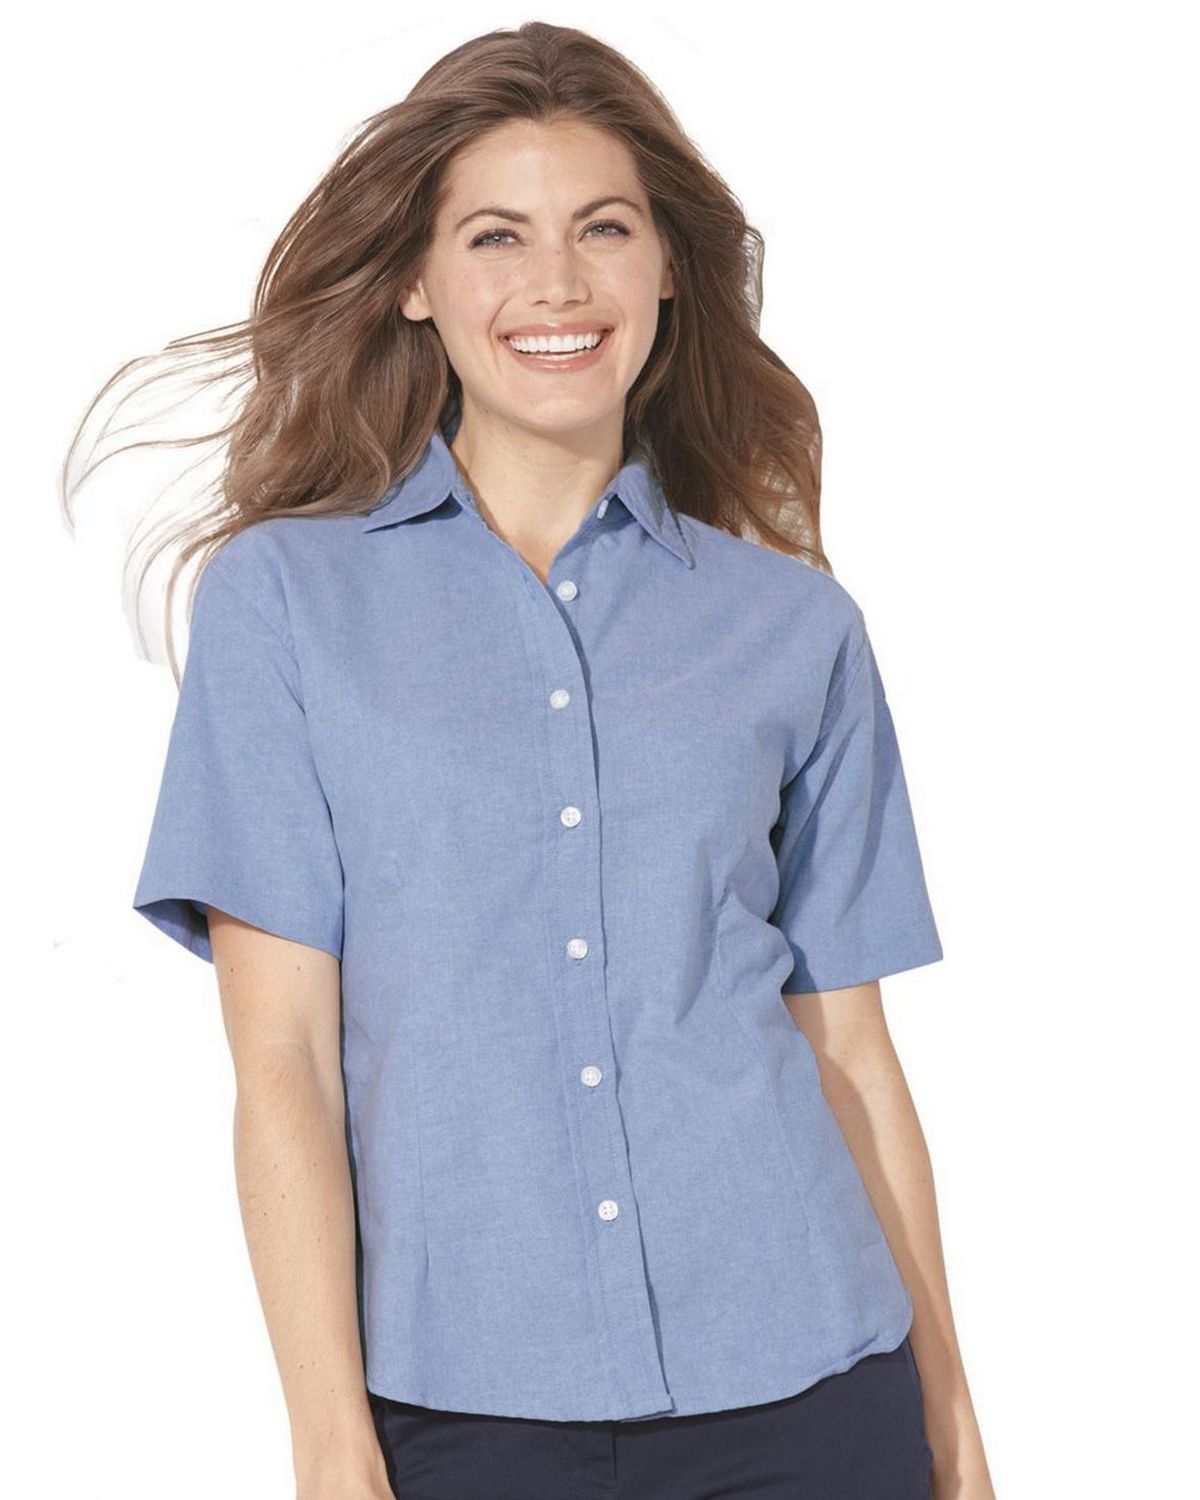 Featherlite 5231 Womens Short Sleeve Stain Resistant Oxford Shirt